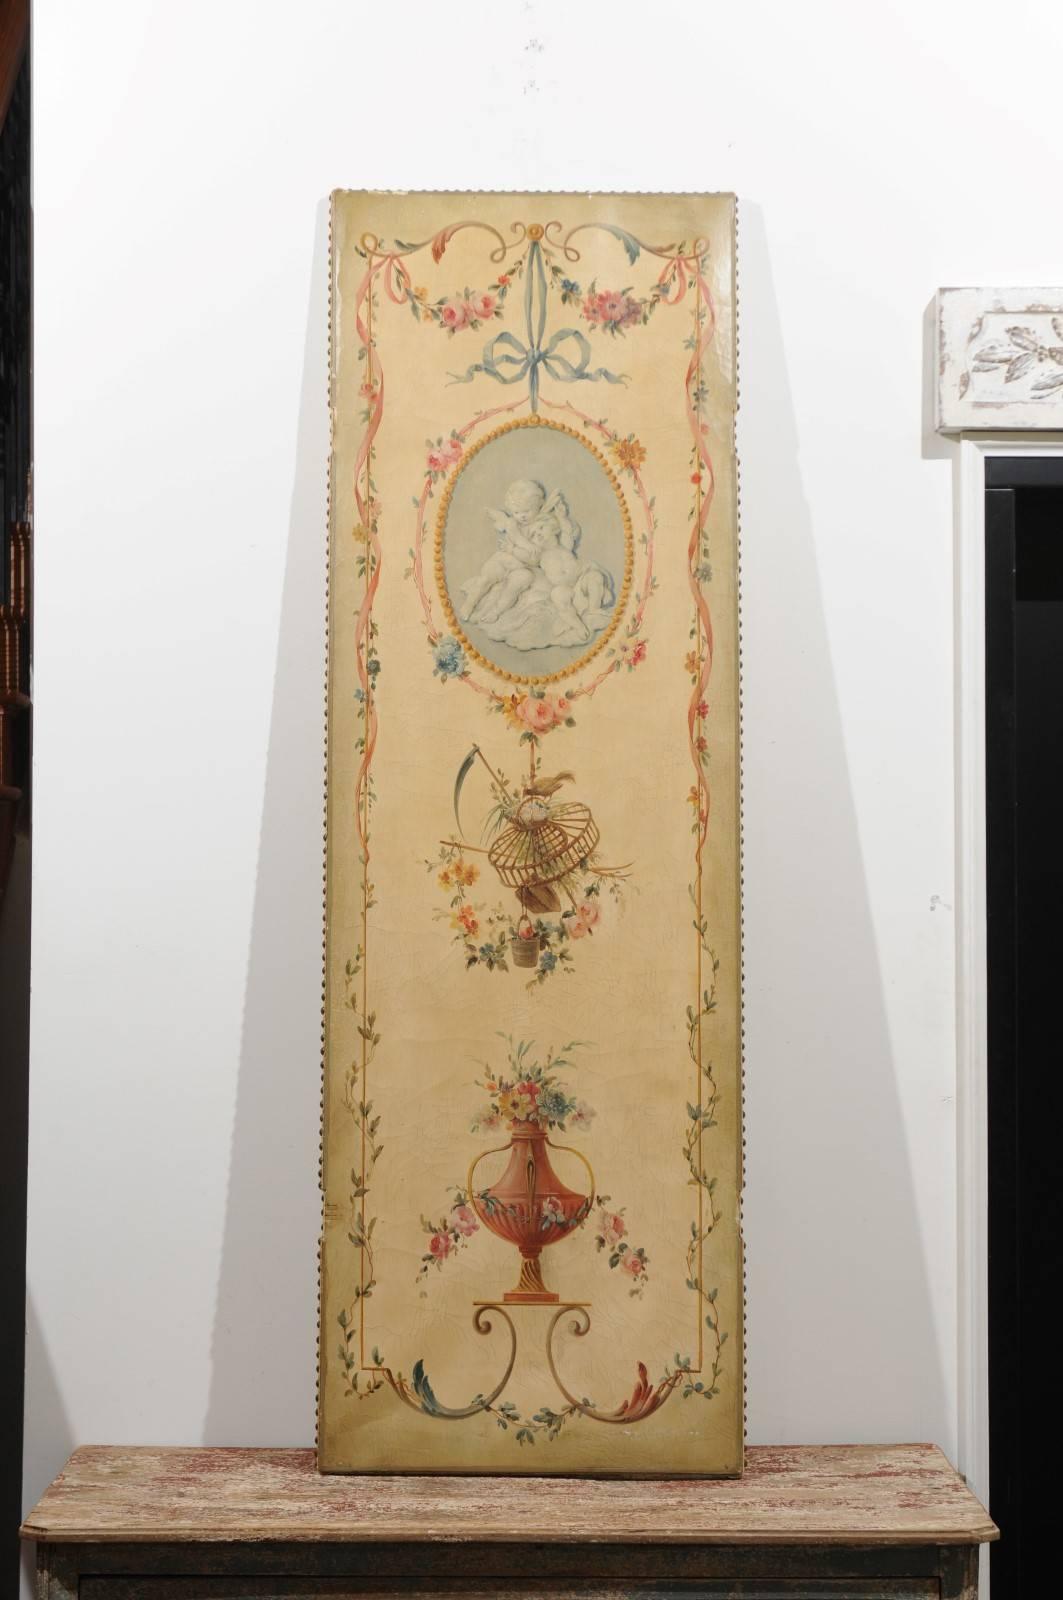 An Italian single oil on canvas painted panel from the 19th century. This exquisite Italian decorative panel features a delicate hand-painted décor, depicting two cherubs surrounded by a ribbon-tied beaded medallion, below which are represented